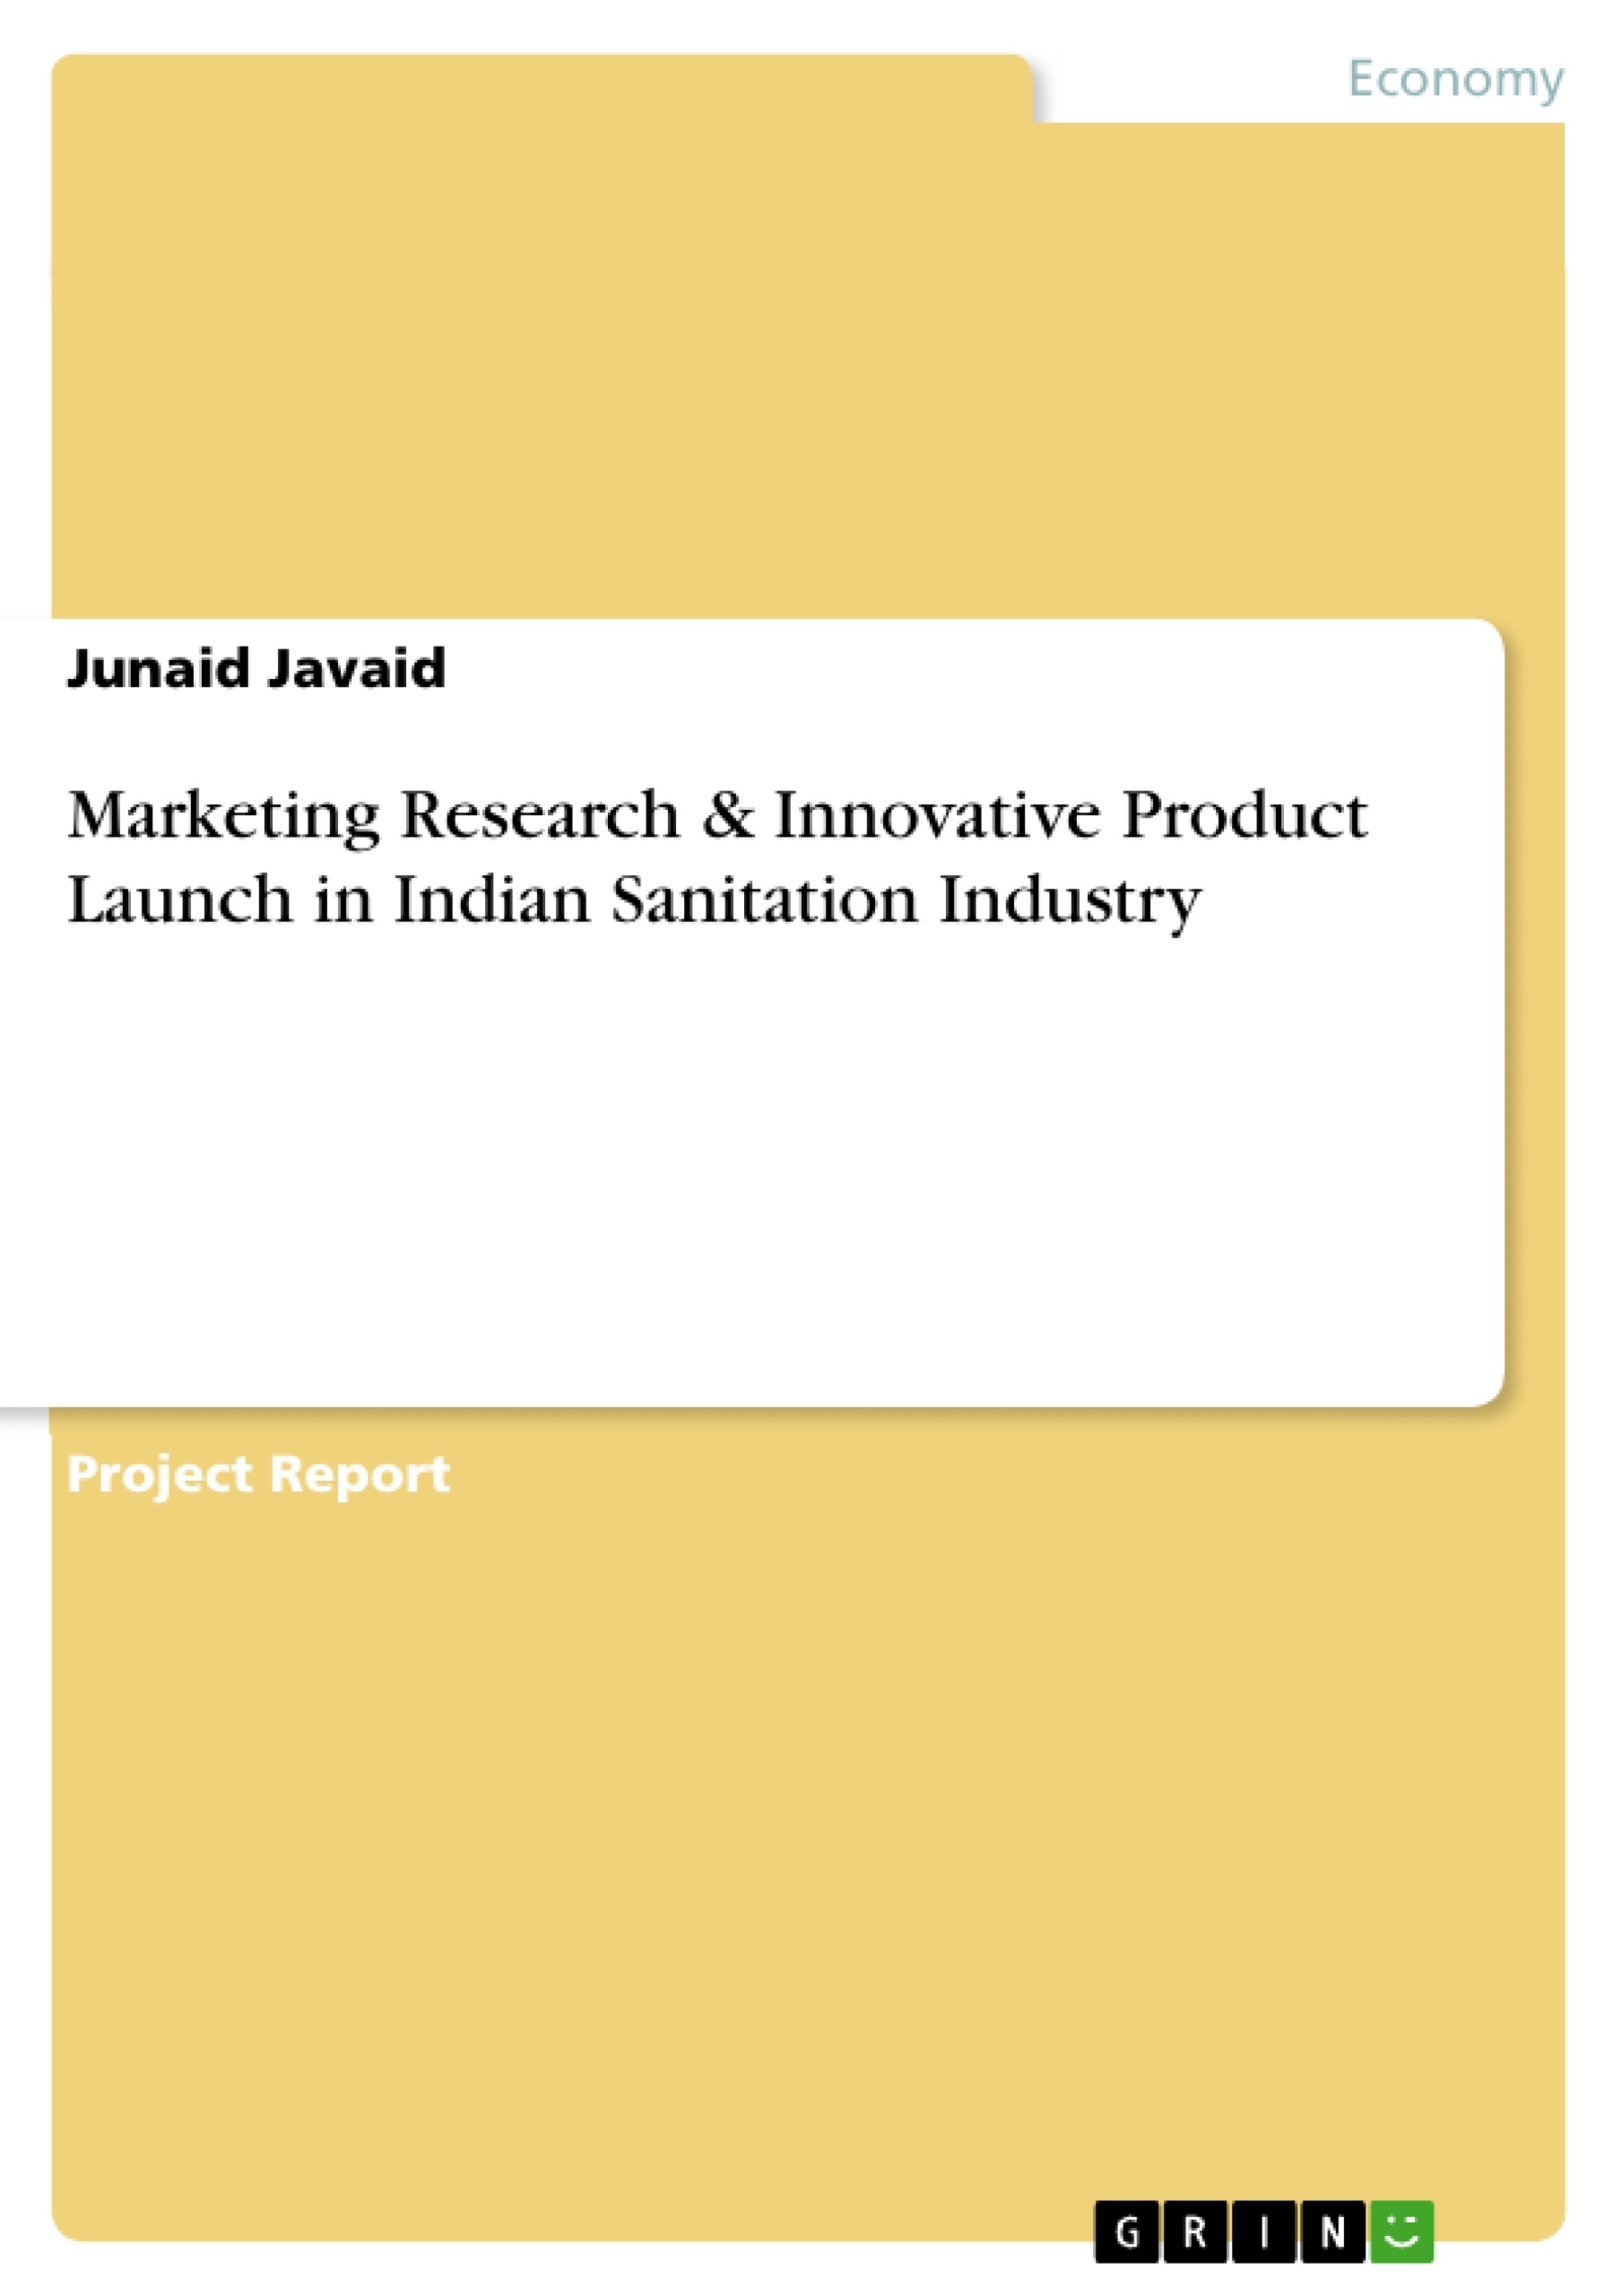 Titre: Marketing Research & Innovative Product Launch in Indian Sanitation Industry